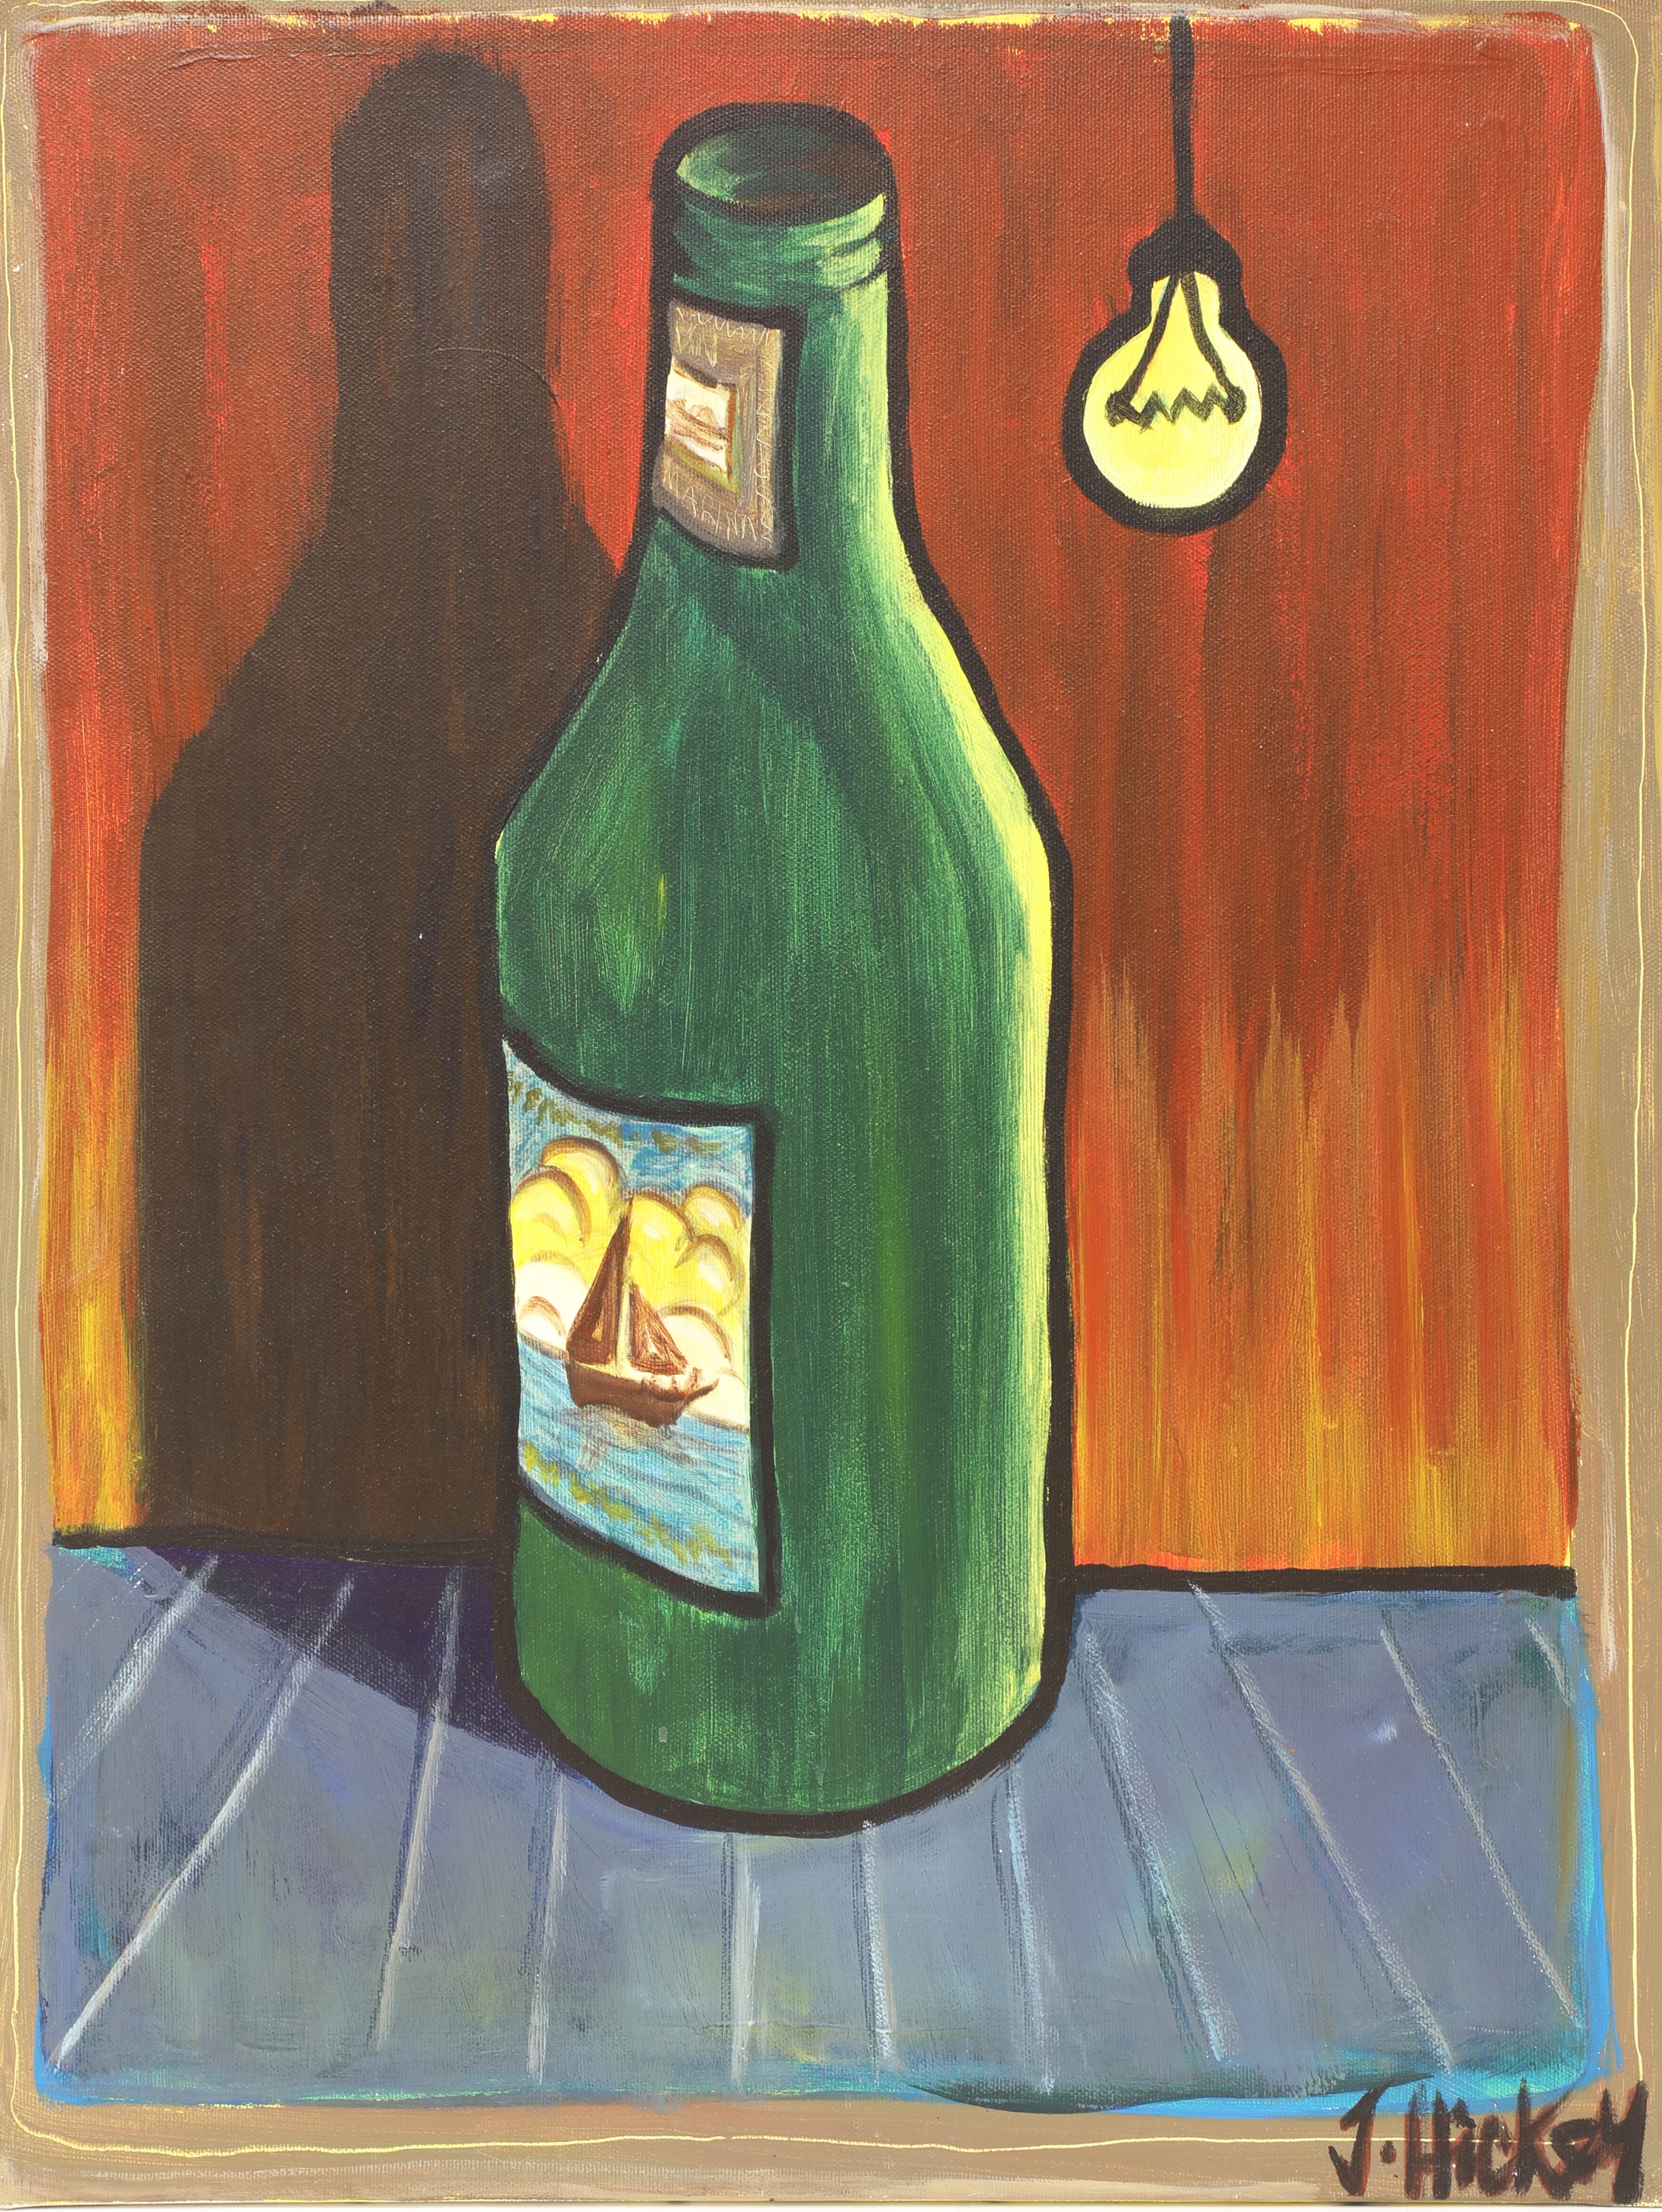 Artwork by Joby Hickey, Bottle, Made of acrylic on canvas